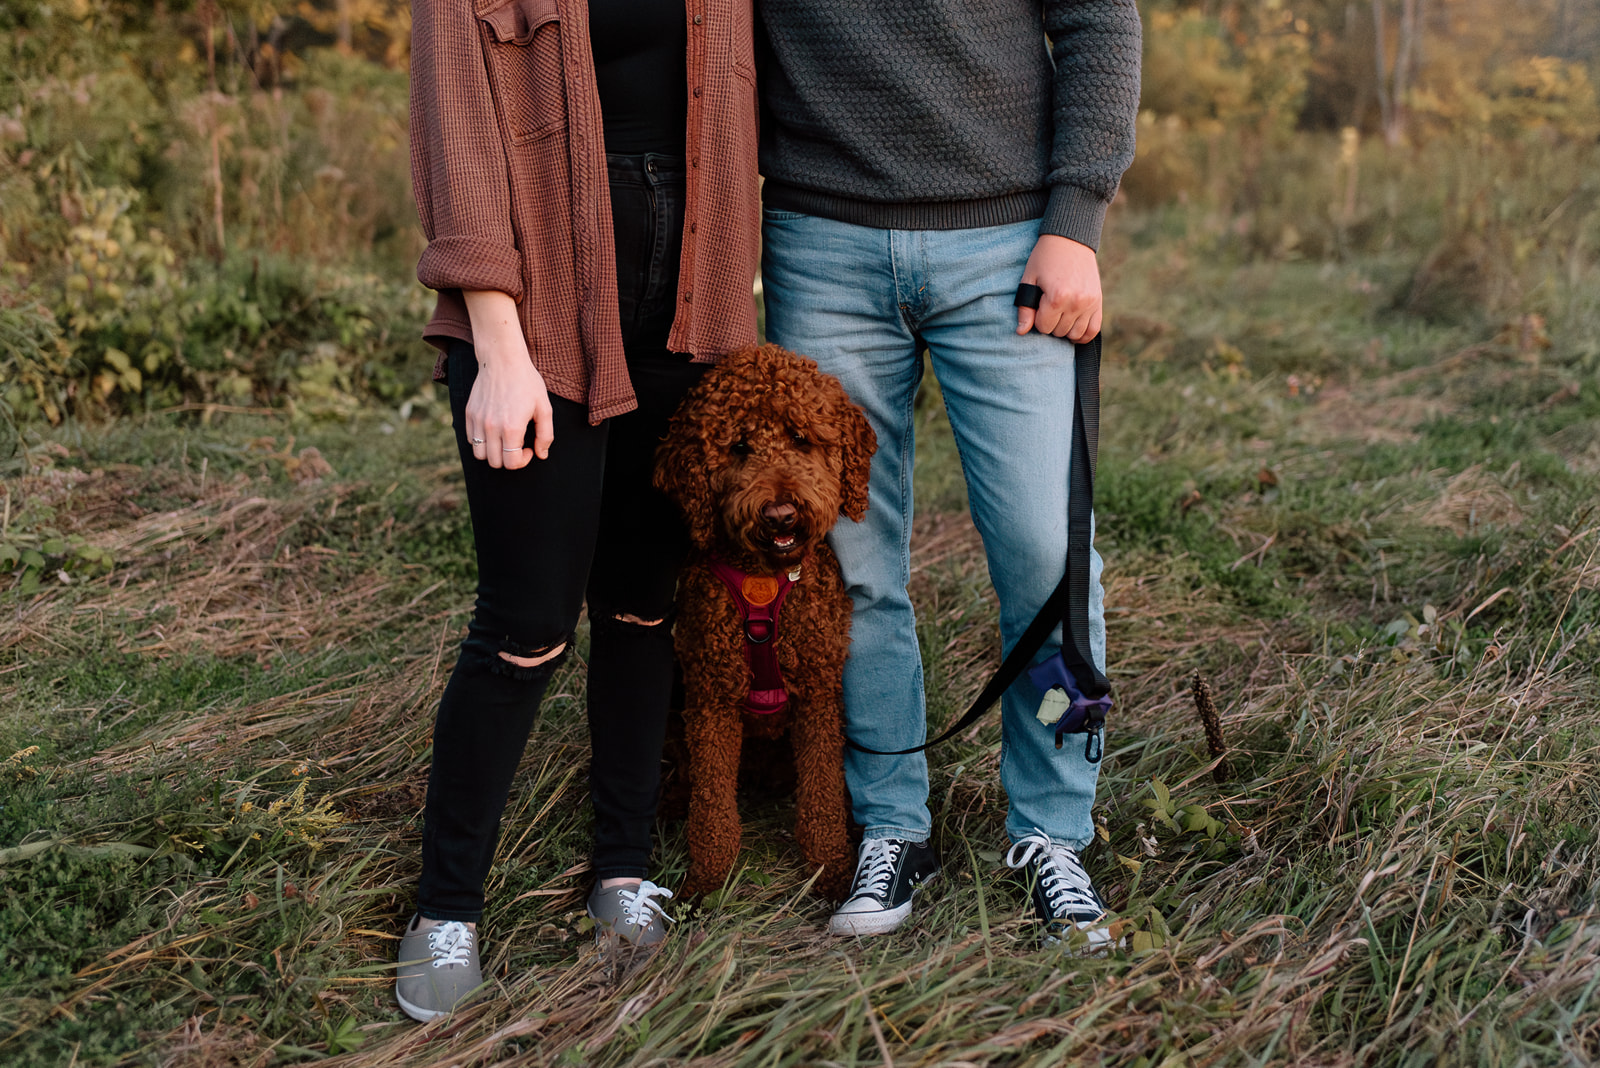 An engaged couple and their dog taking a walk through the autumn leaves during an engagement session. 